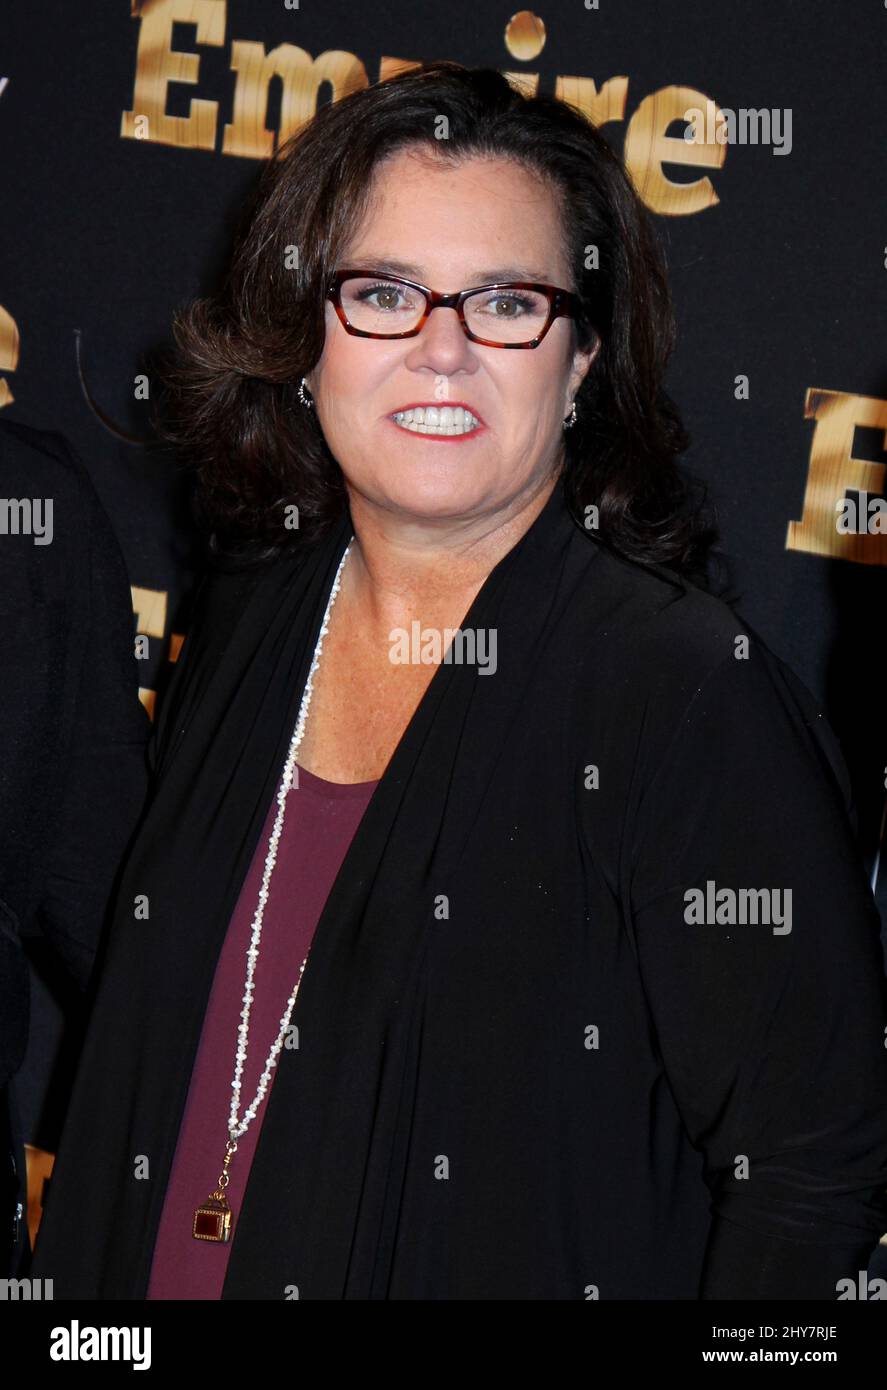 Rosie O'Donnell attending the "Empire" Season 2 Premiere held at Carnegie Hall in New York, USA. Stock Photo